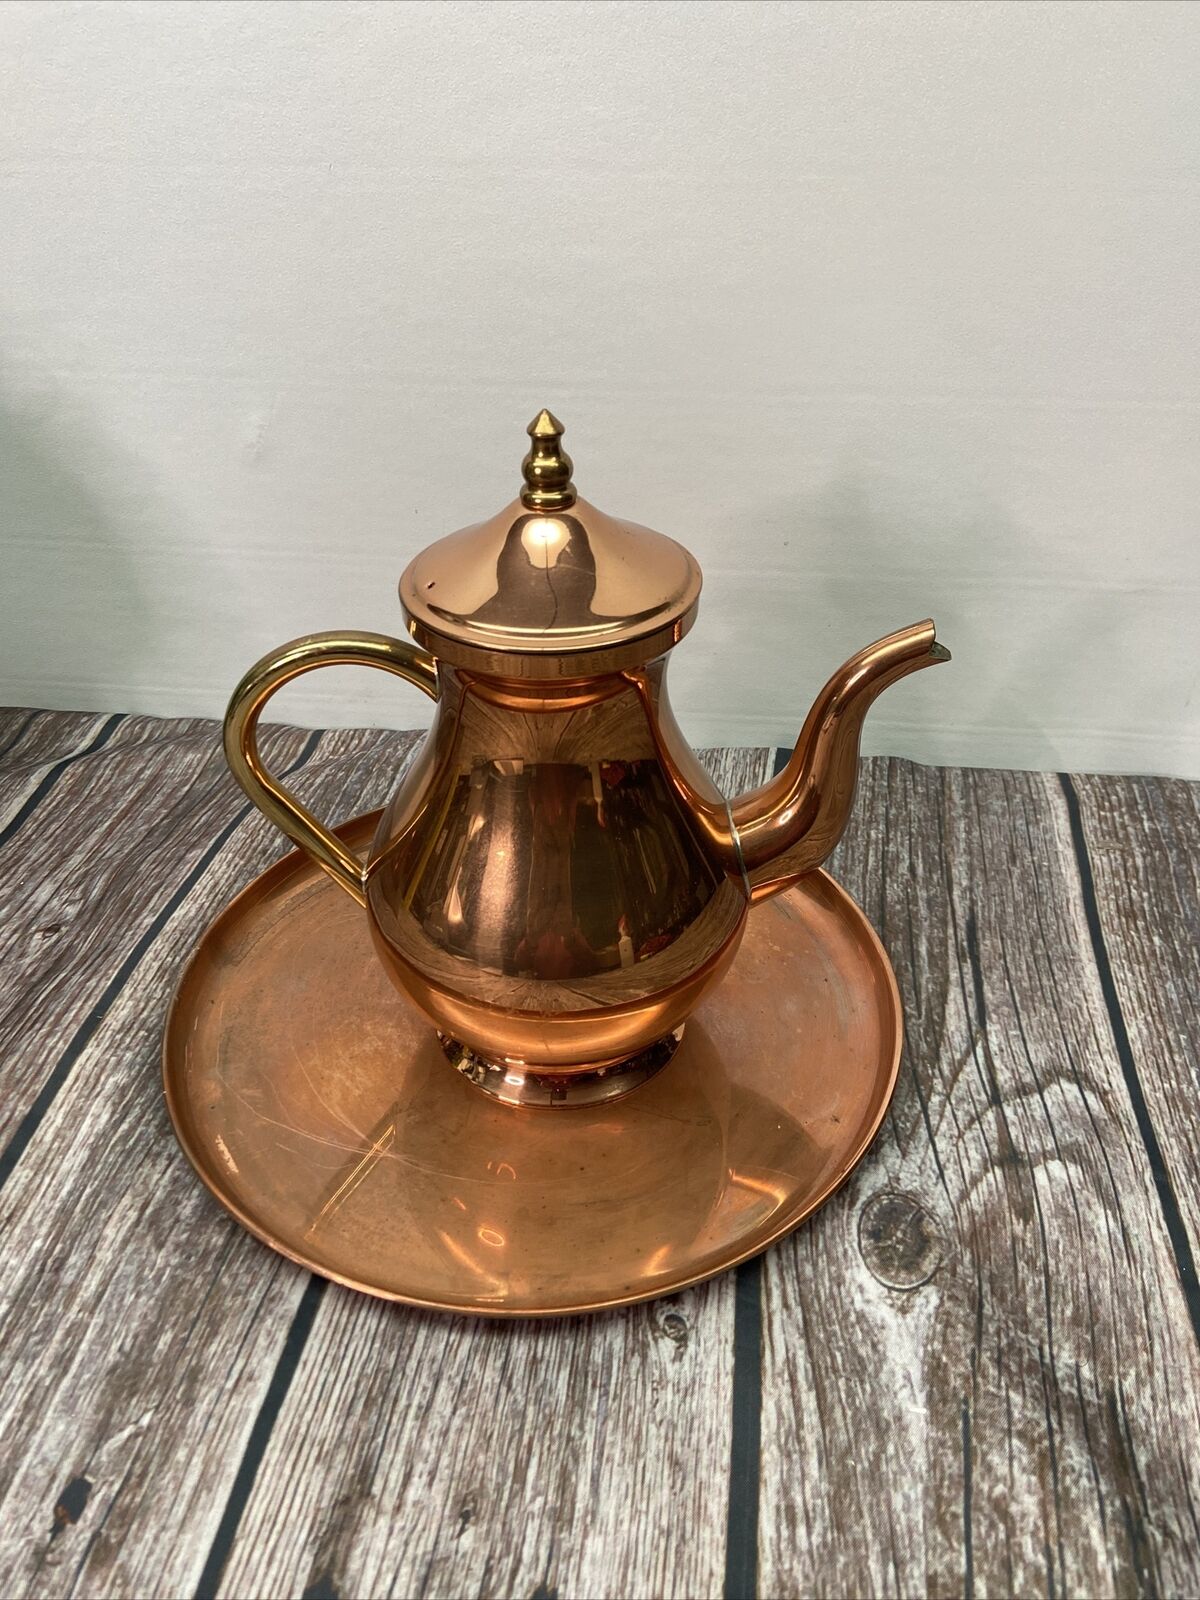 VTG ODI Old Dutch International Copper Teapot  and Serving Tray~Made in Portugal